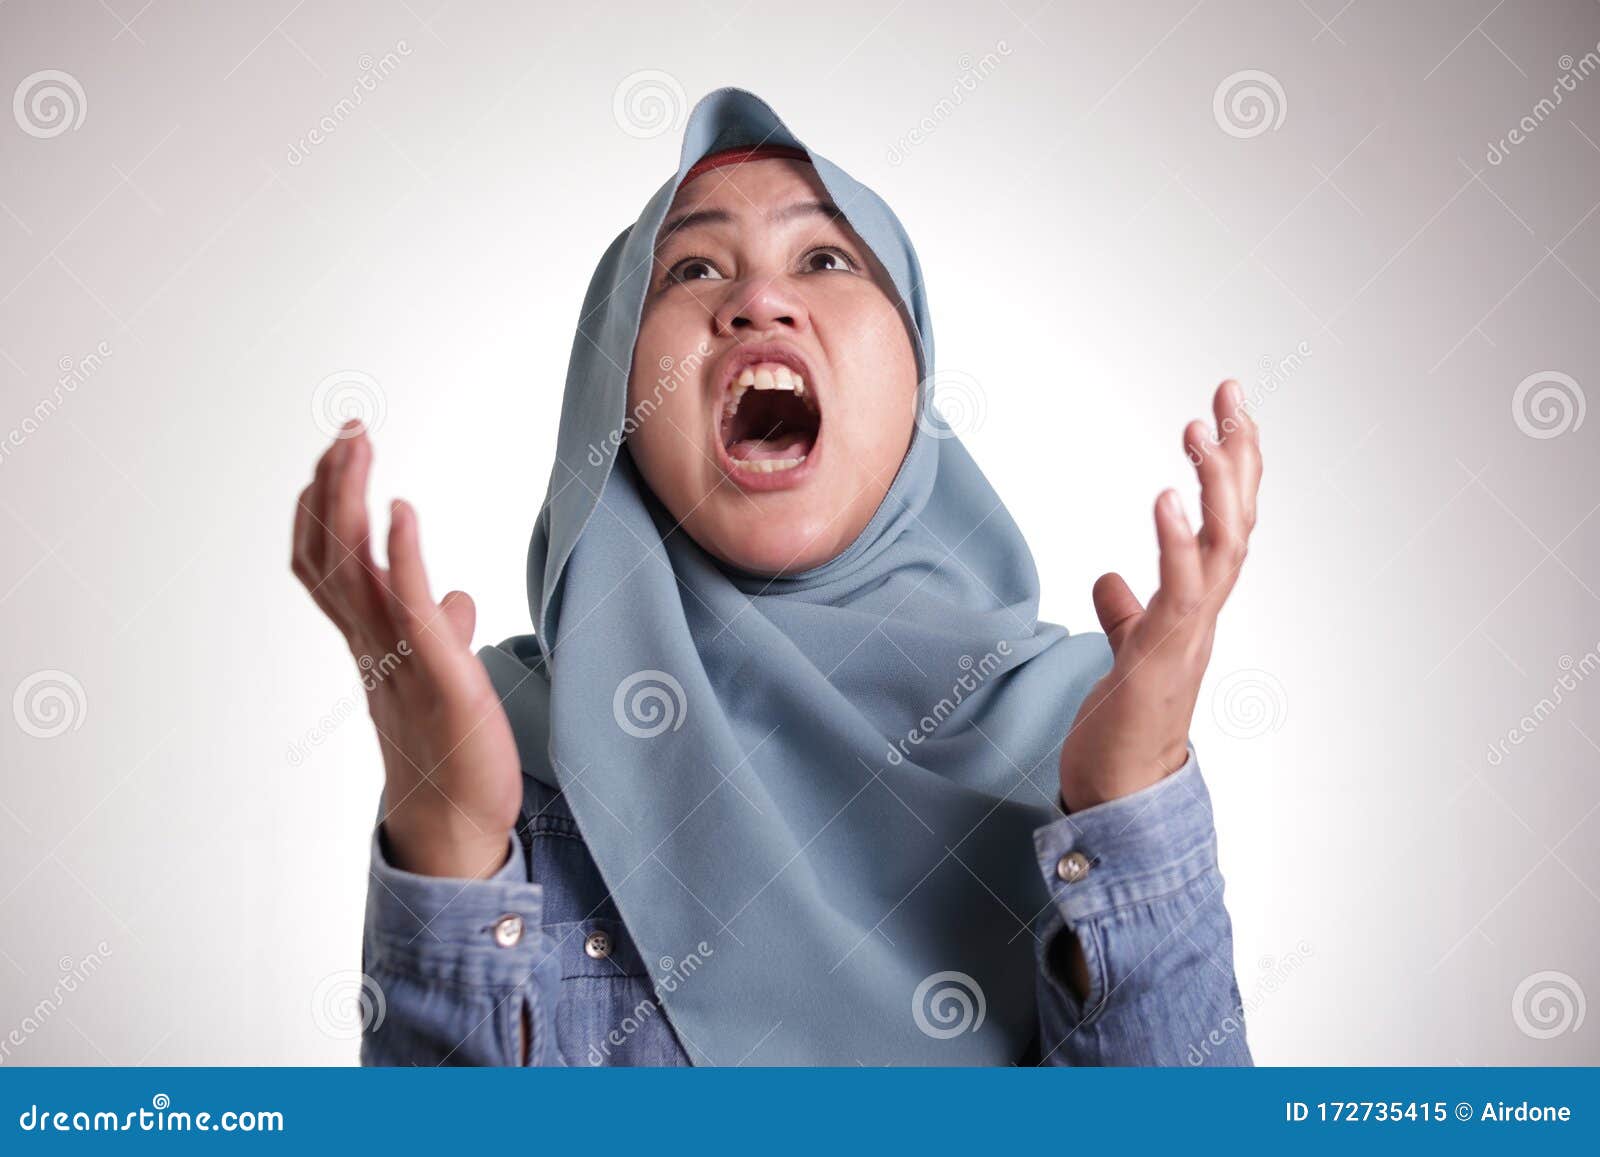 Muslim Lady In Shows Angry Gesture Screaming Stock Image Image Of